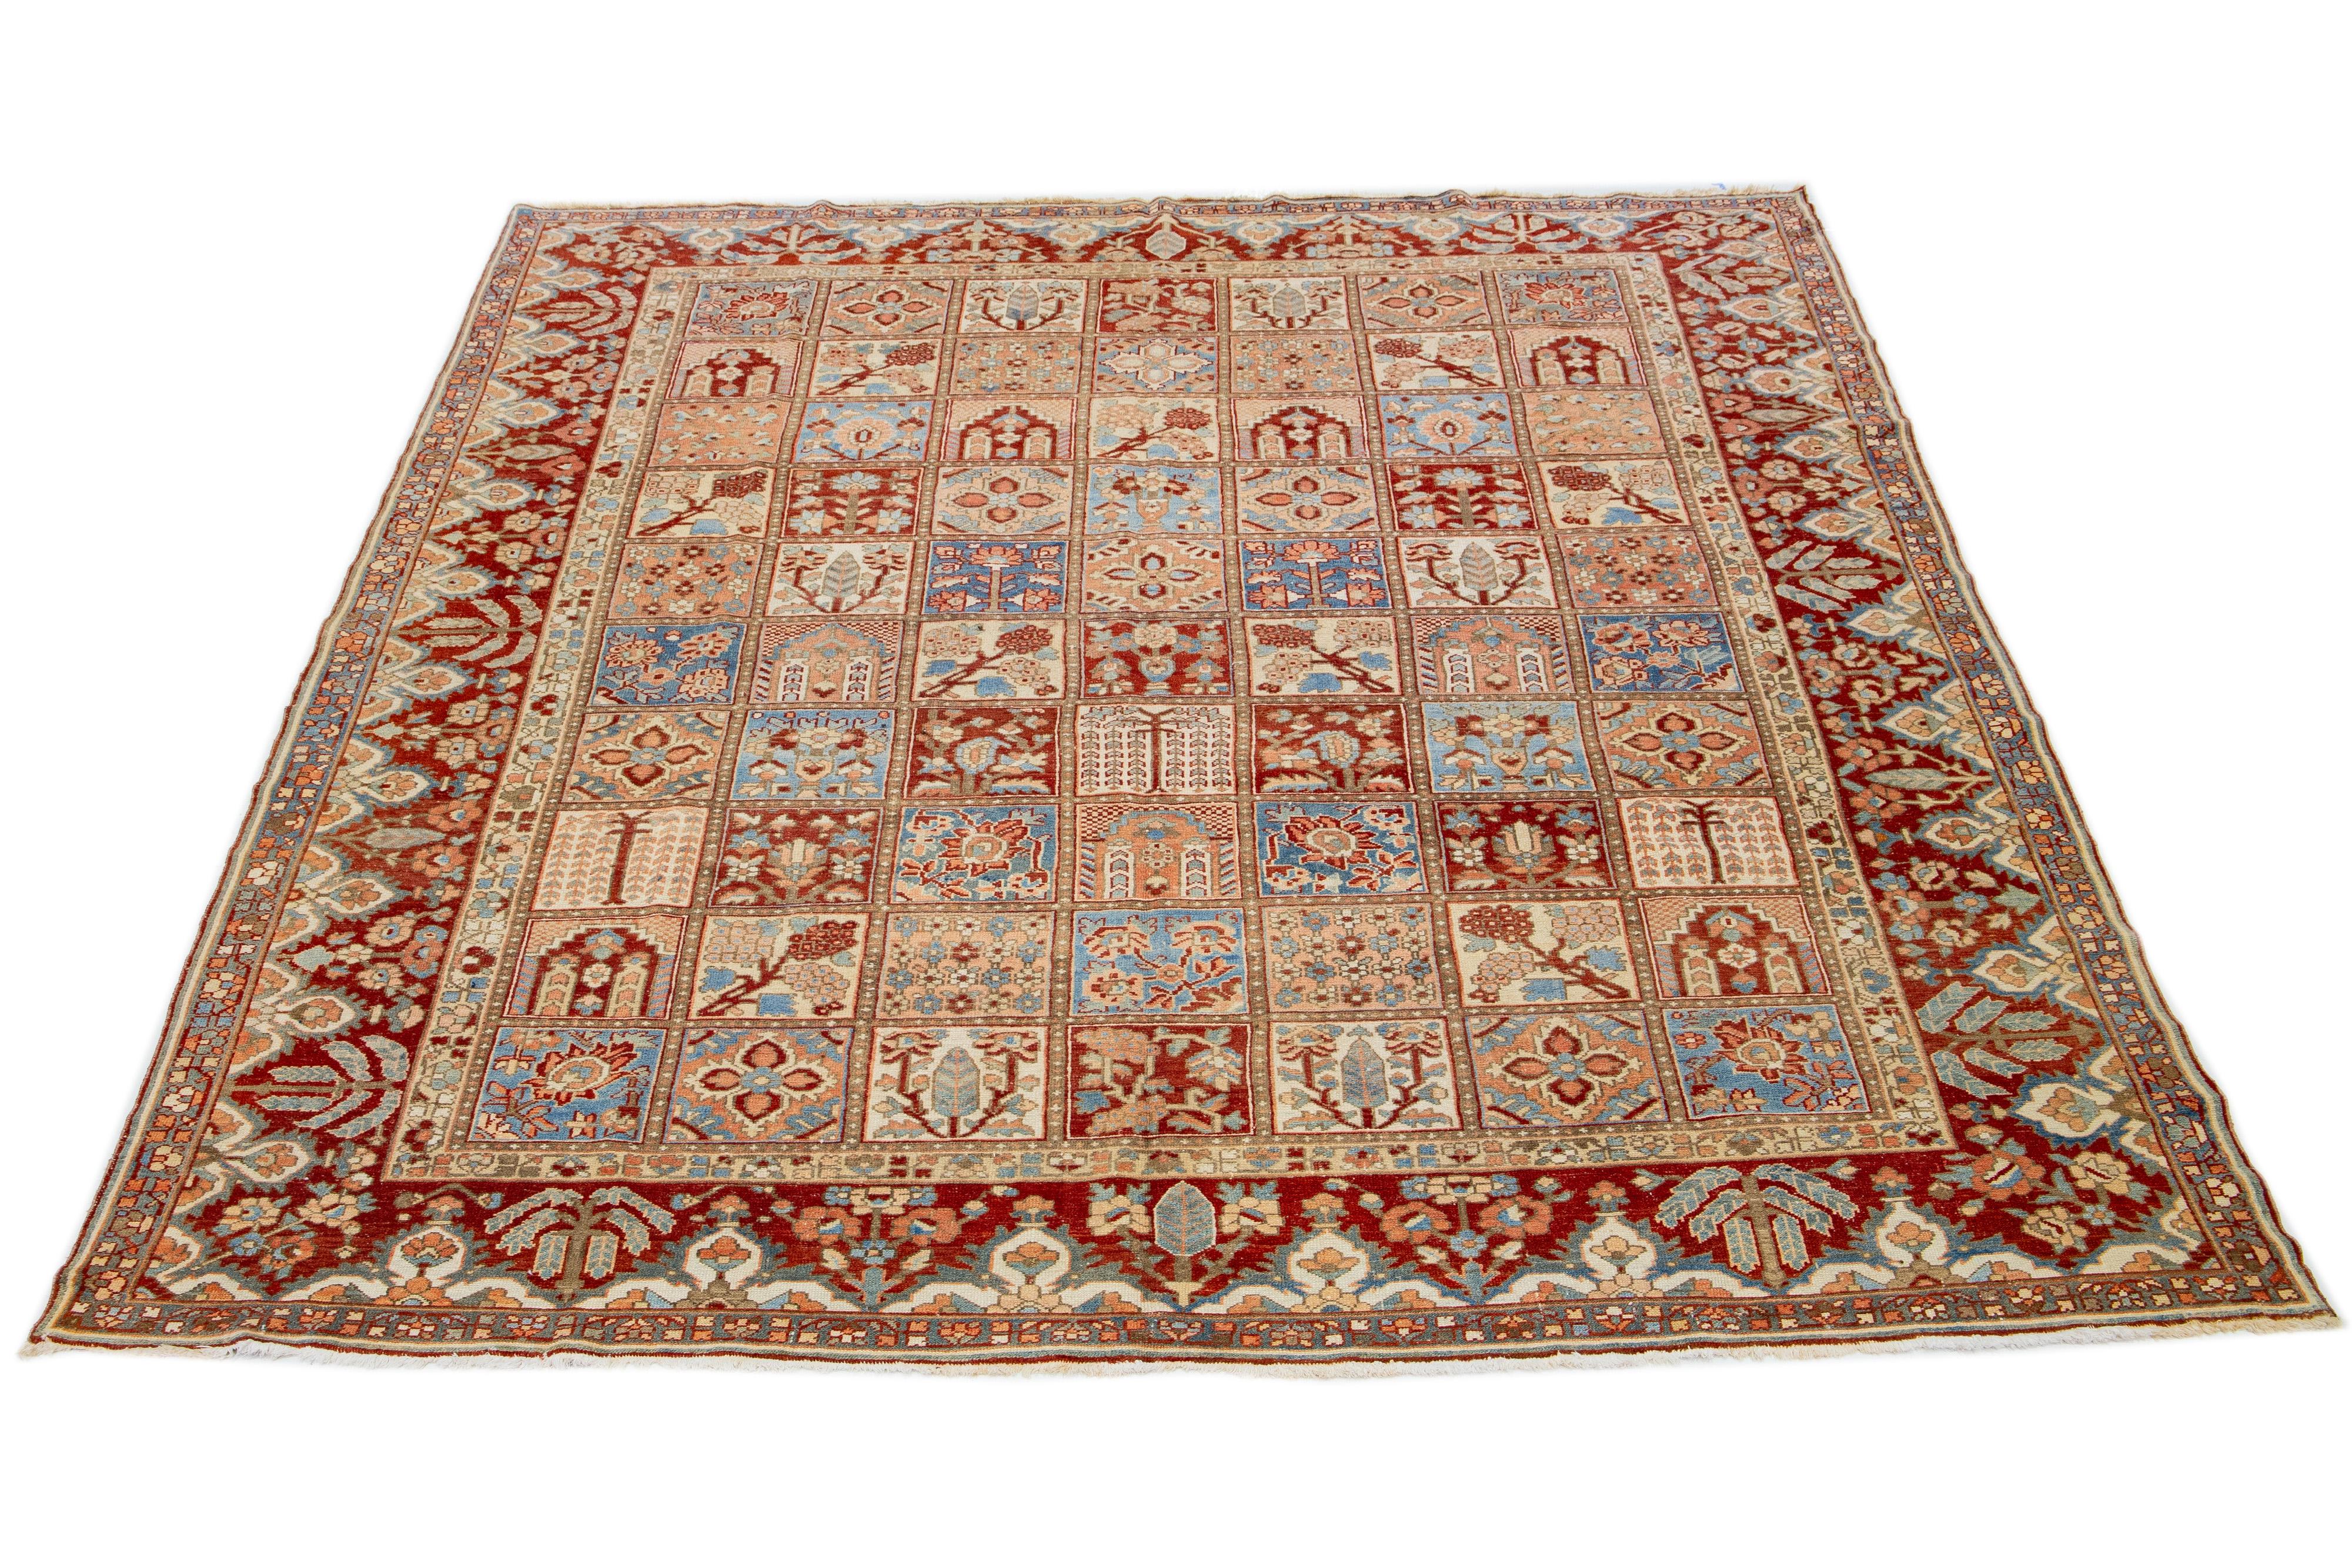 Beautiful Antique Bakhtiari hand-knotted wool rug with a red-rust, blue, beige, and peach color field. This Persian piece has a classic floral pattern.

This rug measures 11' x 13'3